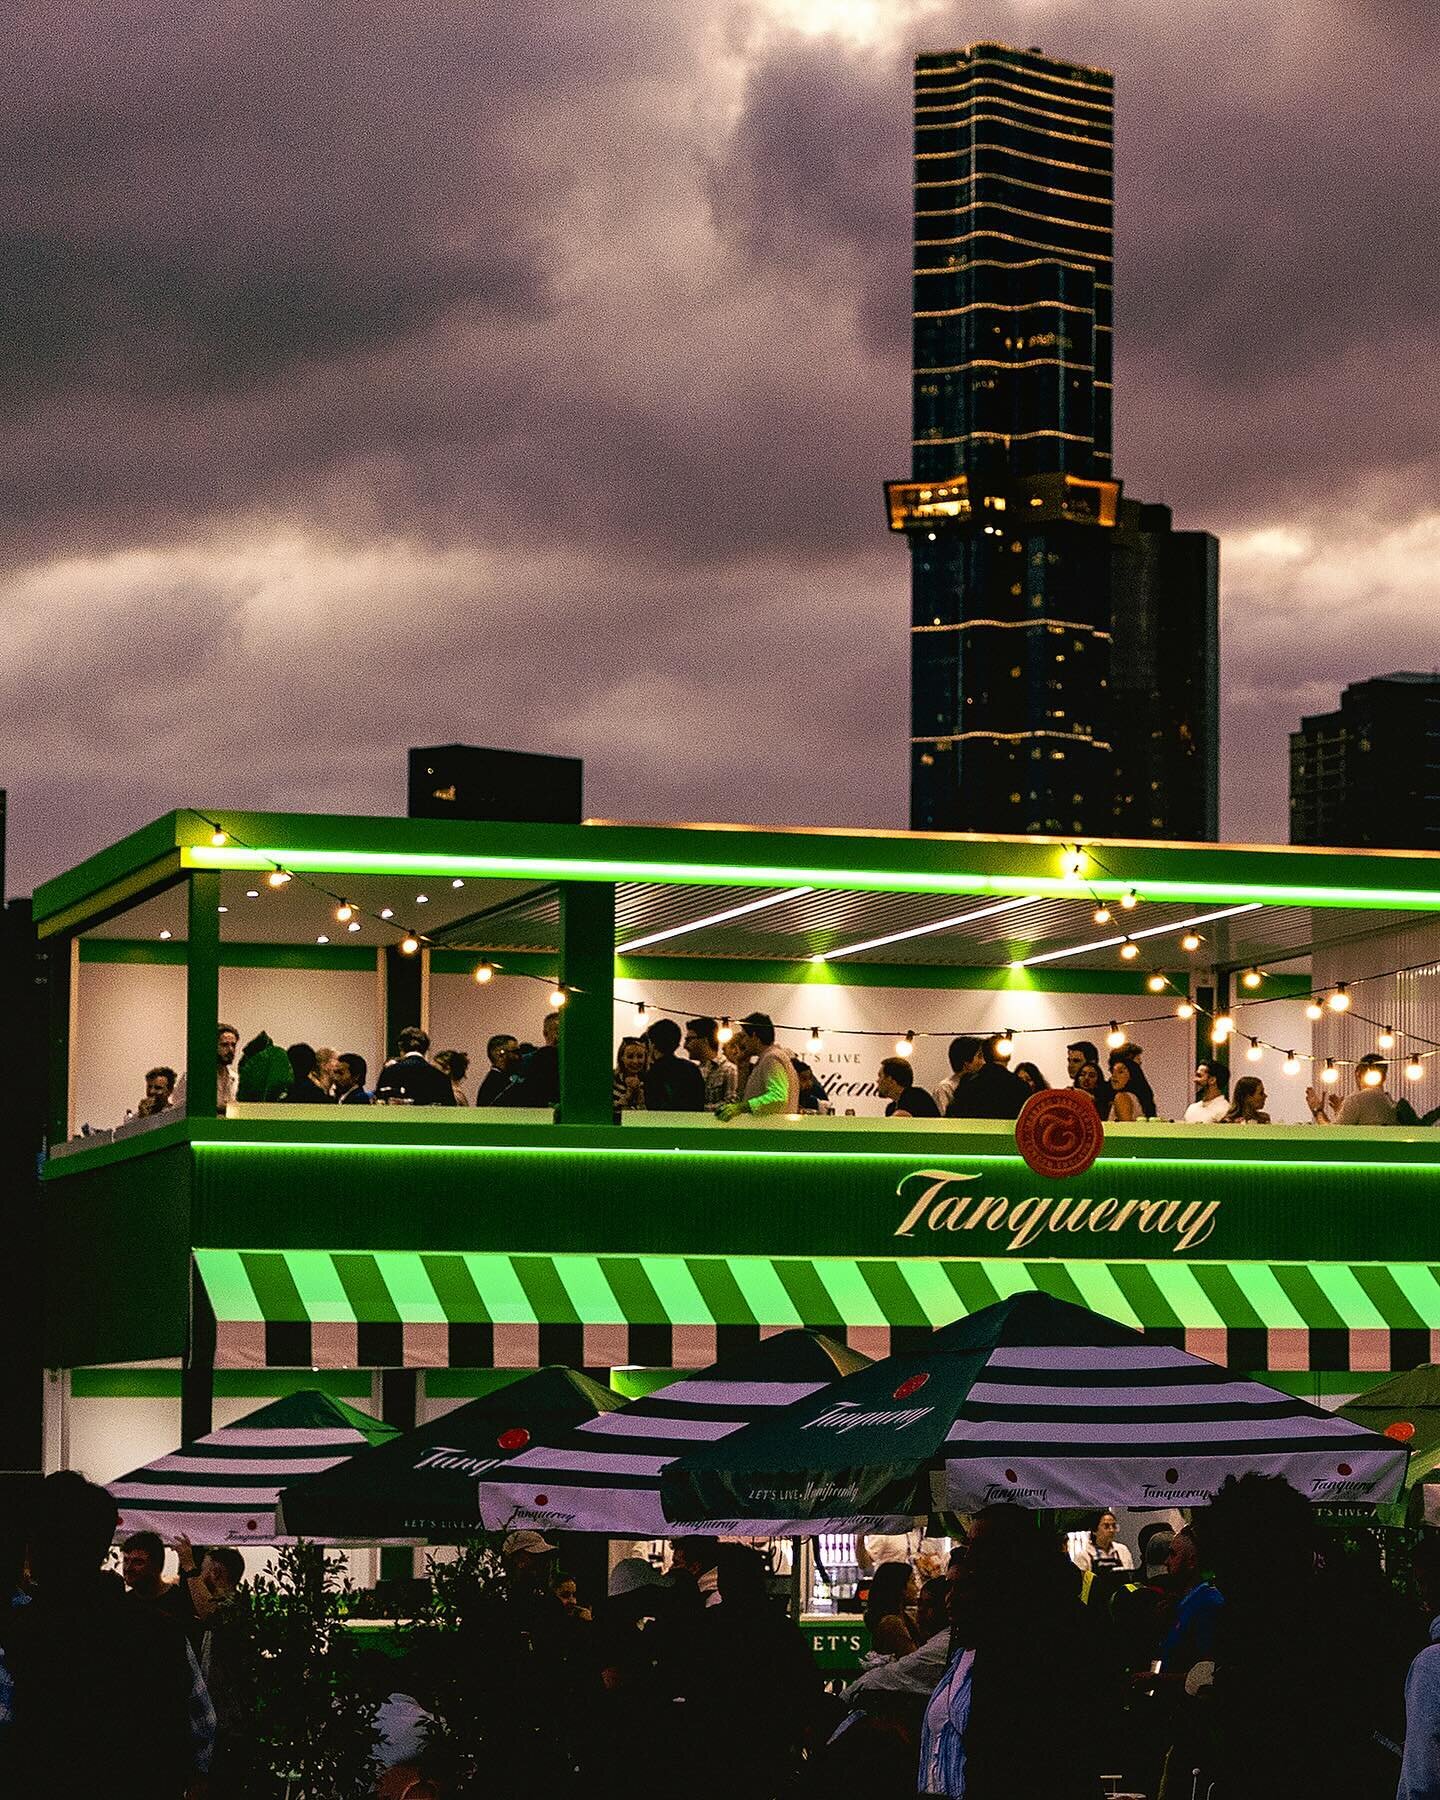 TANQUERAY AT THE AO | @hellotraffik is serving up Magnificence at the @australianopen with @tanquerayginau for @diageo - WHAT A SHOW STOPPER! #letslivemagnificently